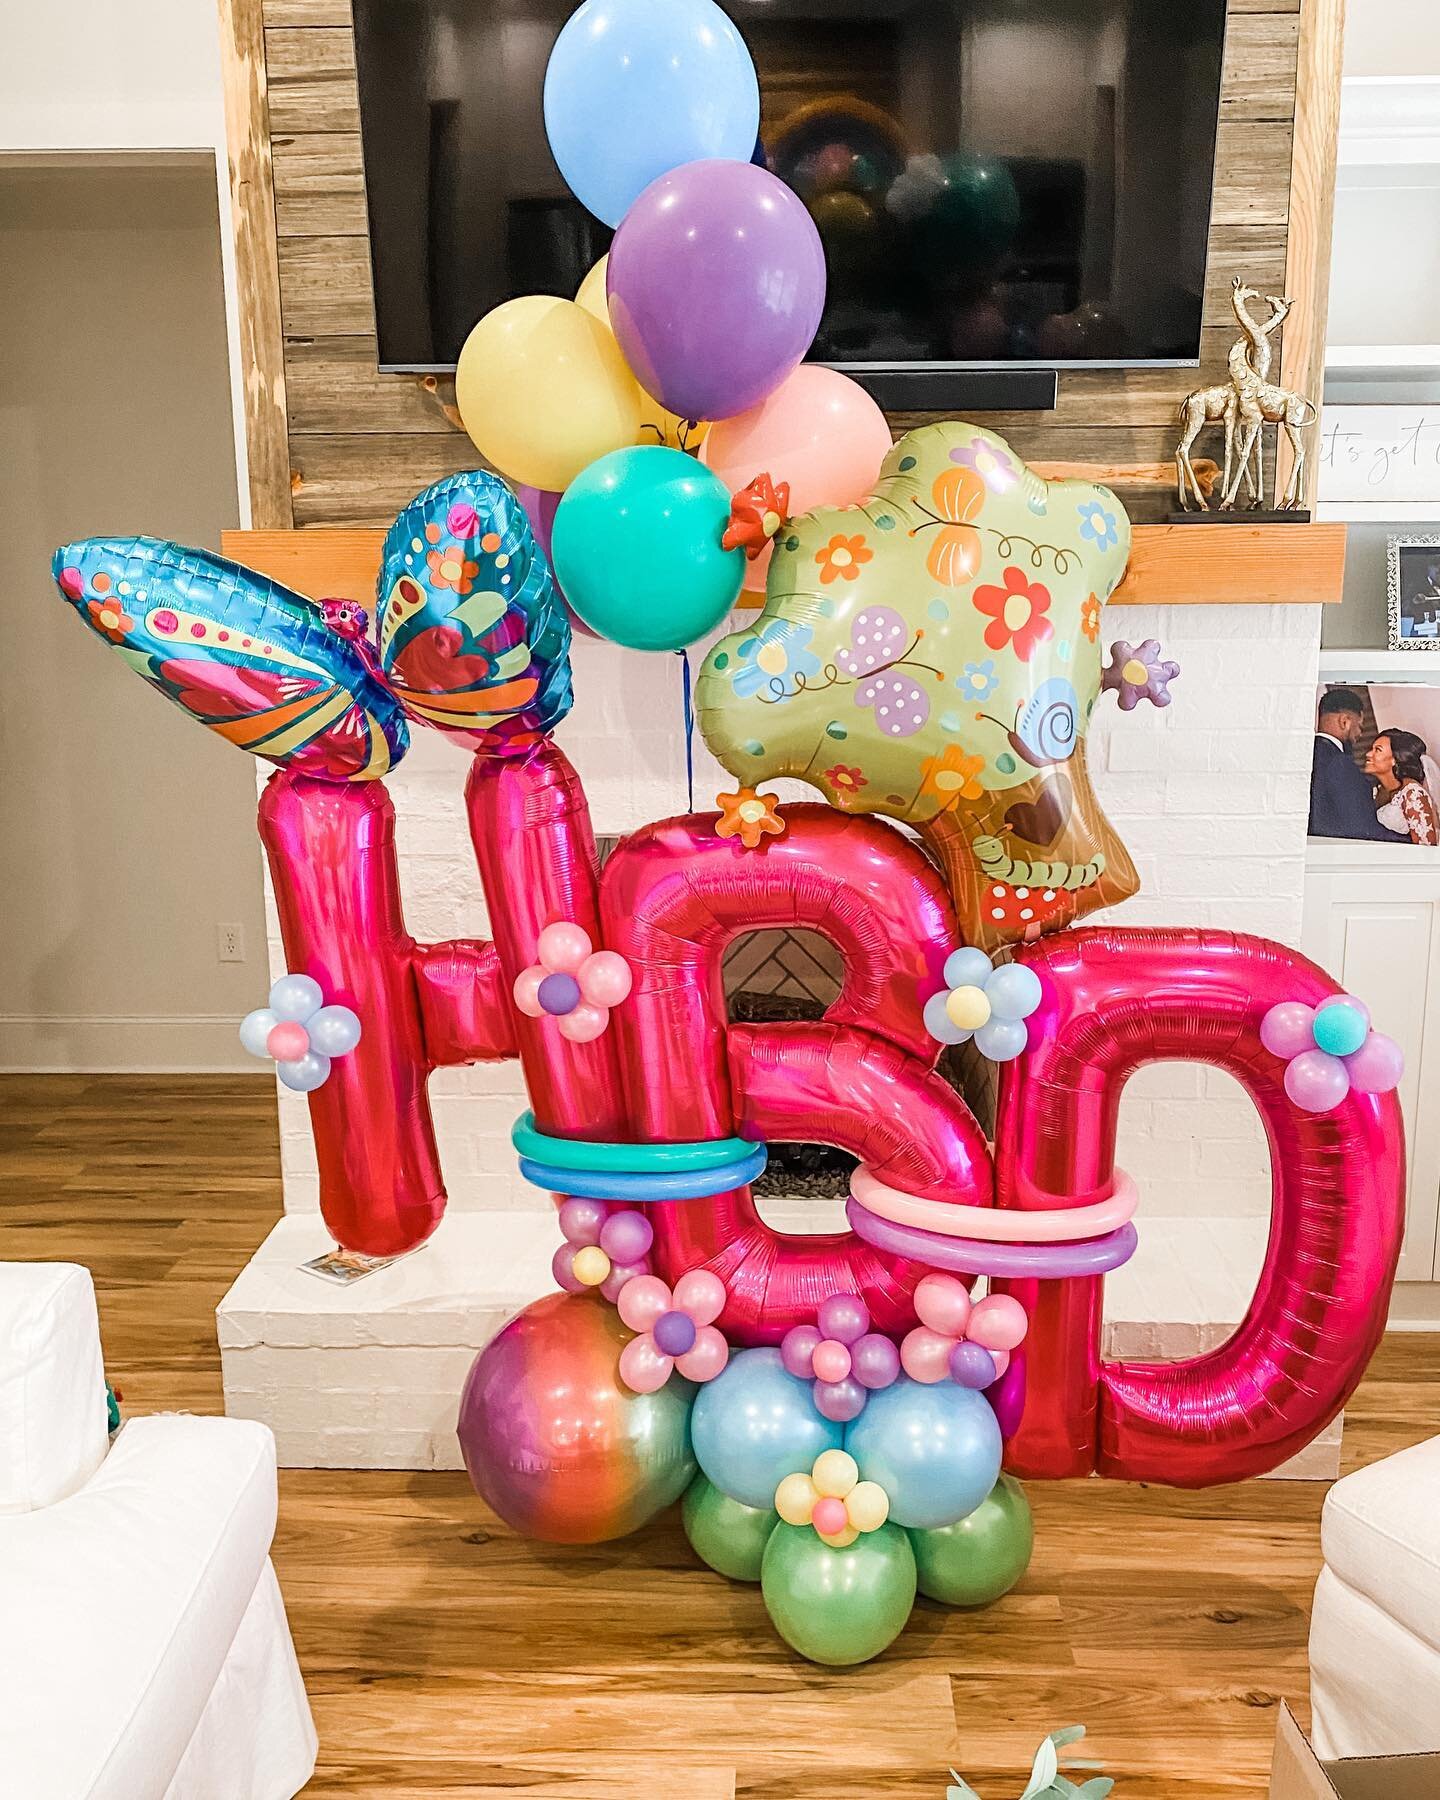 Want a look that you can&rsquo;t get from your local party store? 
Ask about our MEGA balloon sculptures for your next event. Delivery is suggested but pickups are optional if you have a SUV.

www.babaloonz.com